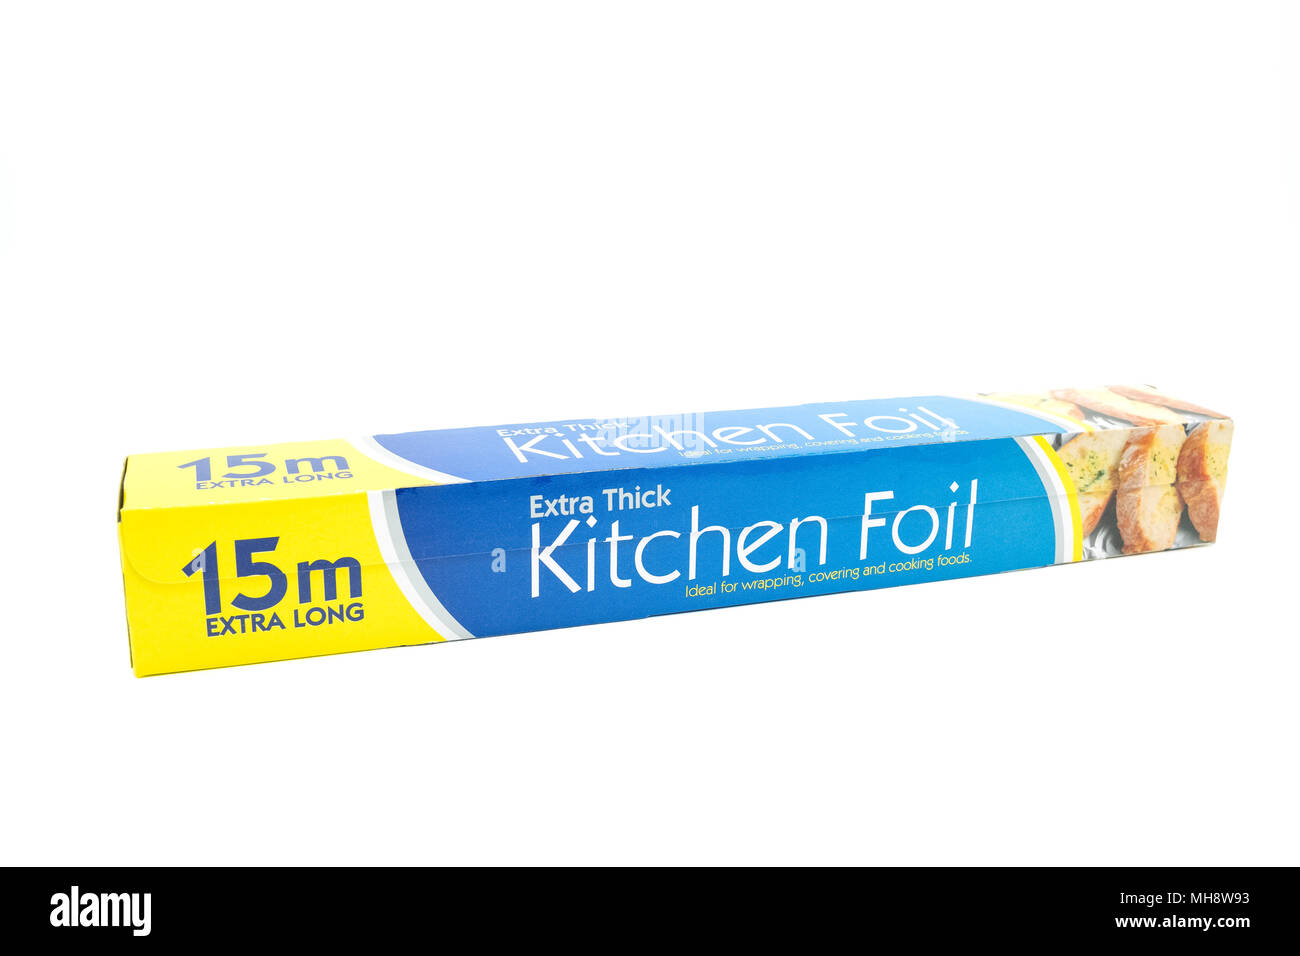 Largs, SCotland, UK - April 25, 2018:                                       Box of Kitchen Foil in Recyclable cardboard Box in agreement with UK Gover Stock Photo